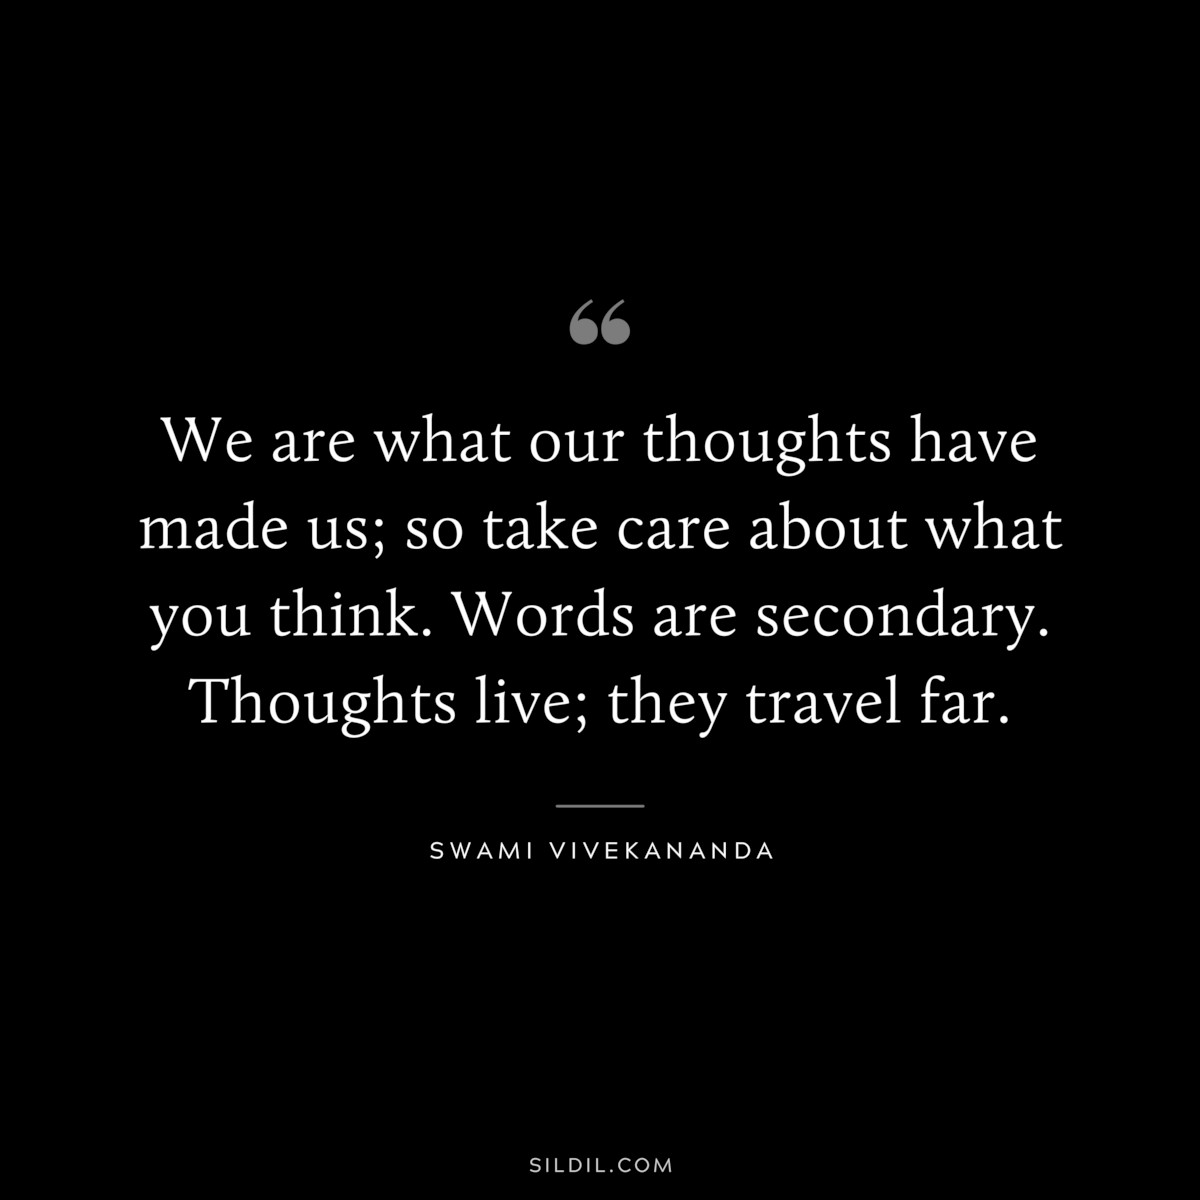 We are what our thoughts have made us; so take care about what you think. Words are secondary. Thoughts live; they travel far. ― Swami Vivekananda